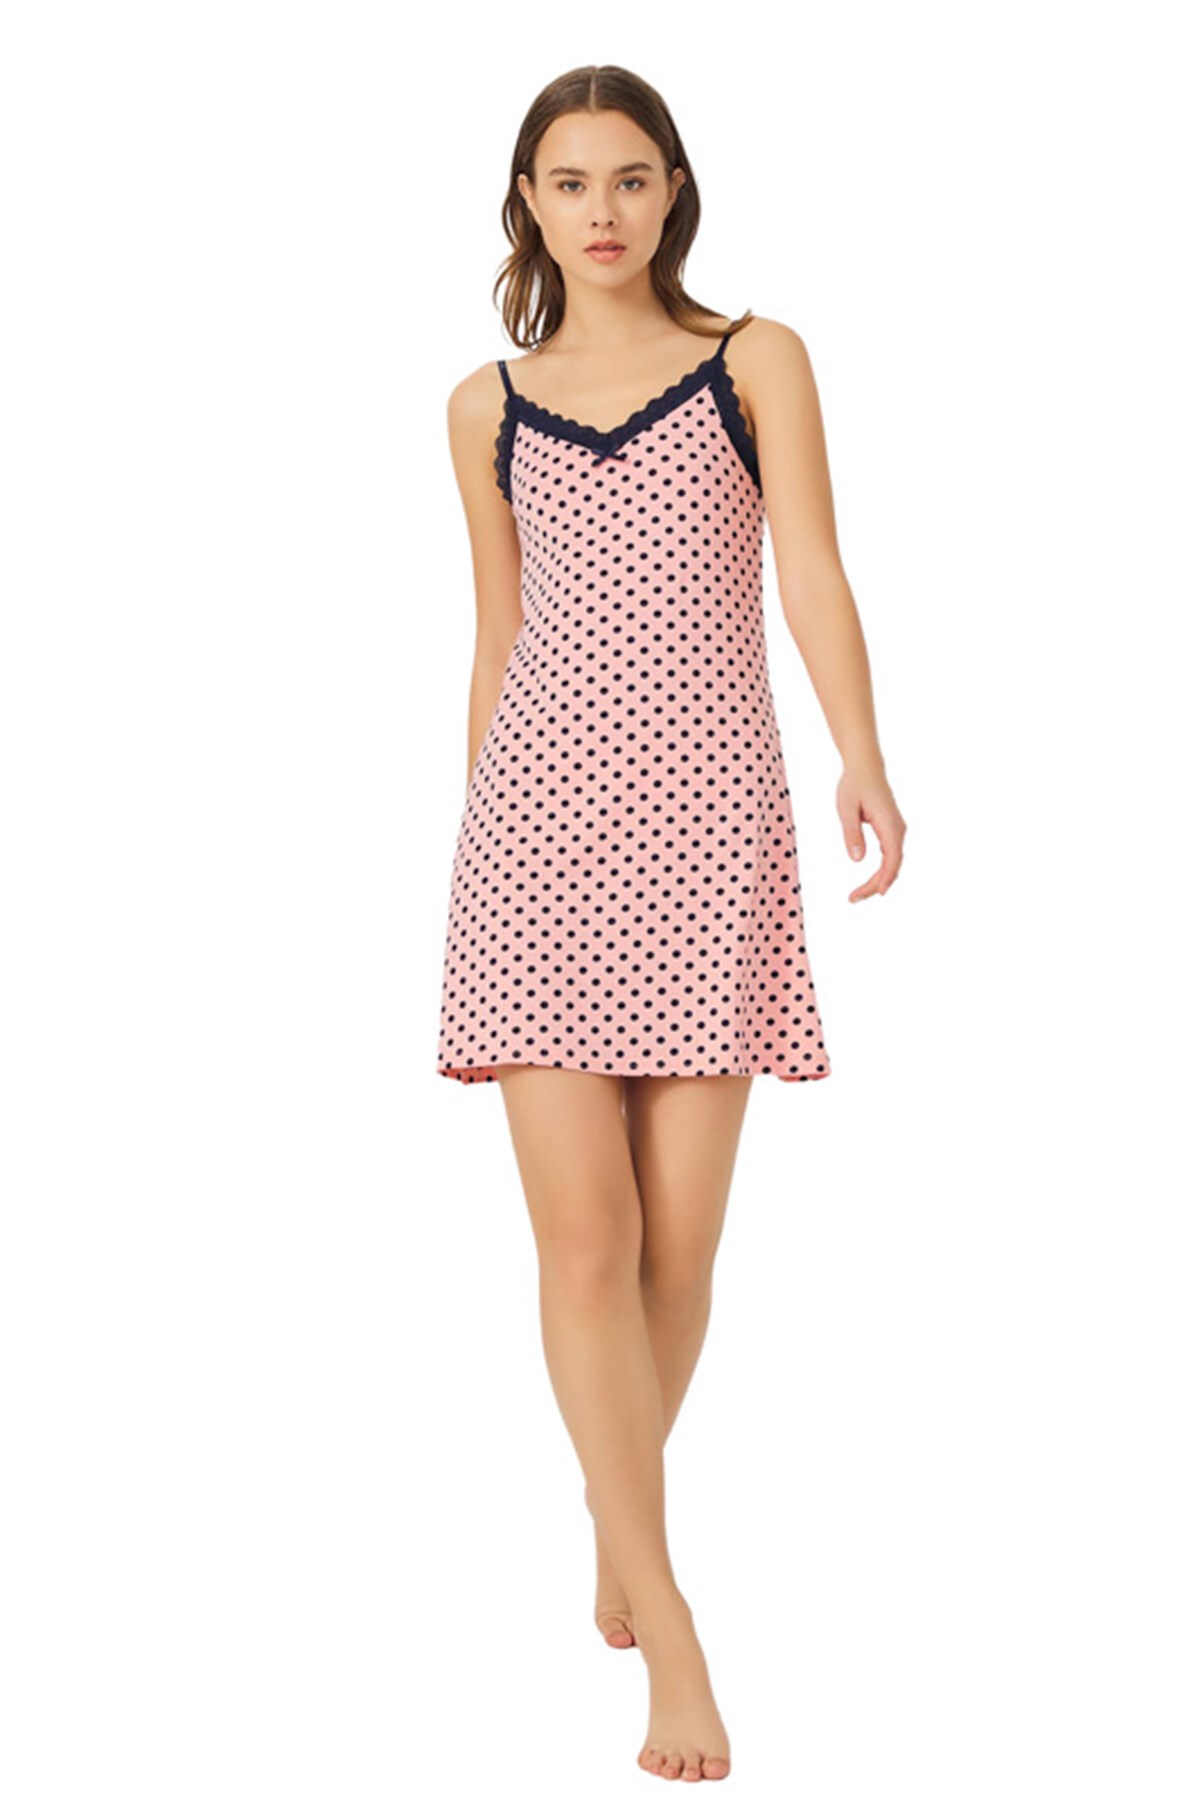 pink-navy-blue-dotted-cotton-nightwear-with-adjustable-strap-ch1406-emp559-1